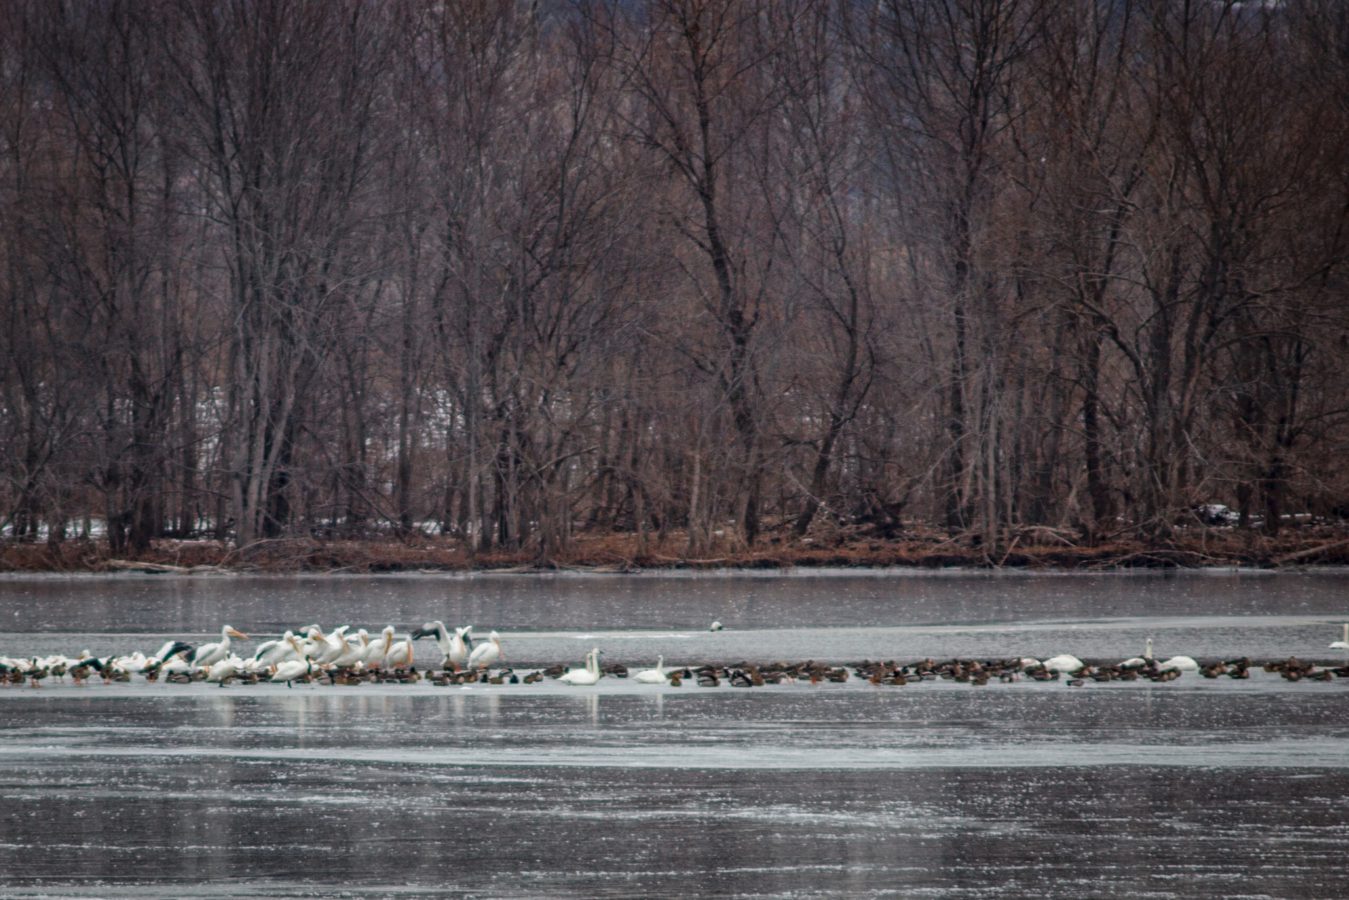 White Pelicans, Trumpeter Swans, and ducks on the Mississippi River